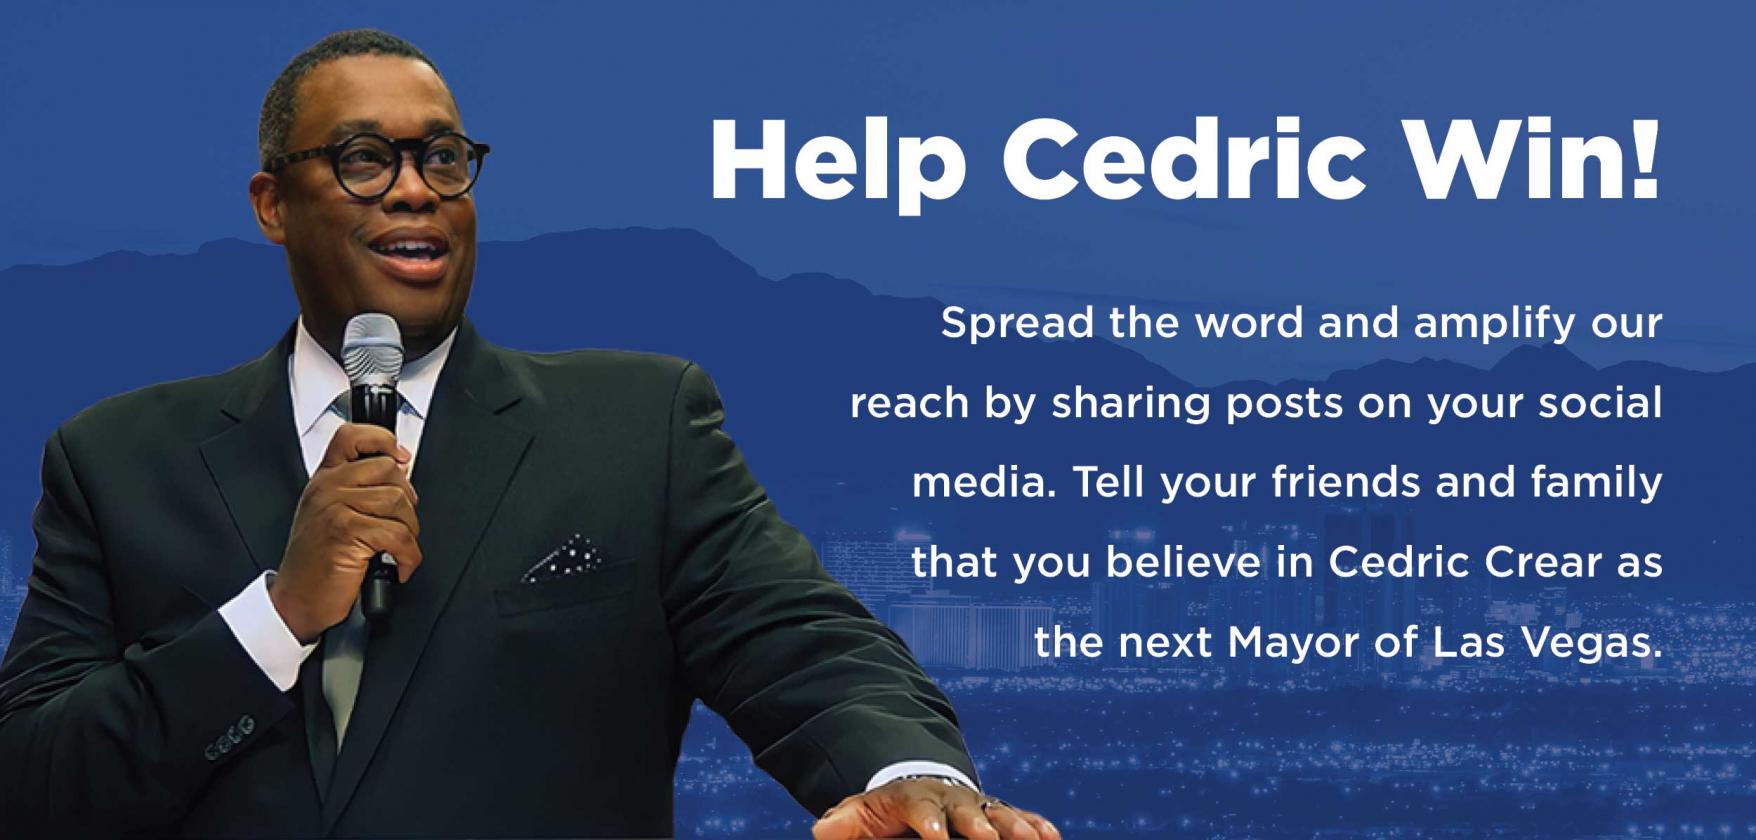 Help Cedric Win! Spread the word and amplify our reach by sharing posts on your social media. Tell your friends and family that you believe in Cedric Crear as the next Mayor of Las Vegas.